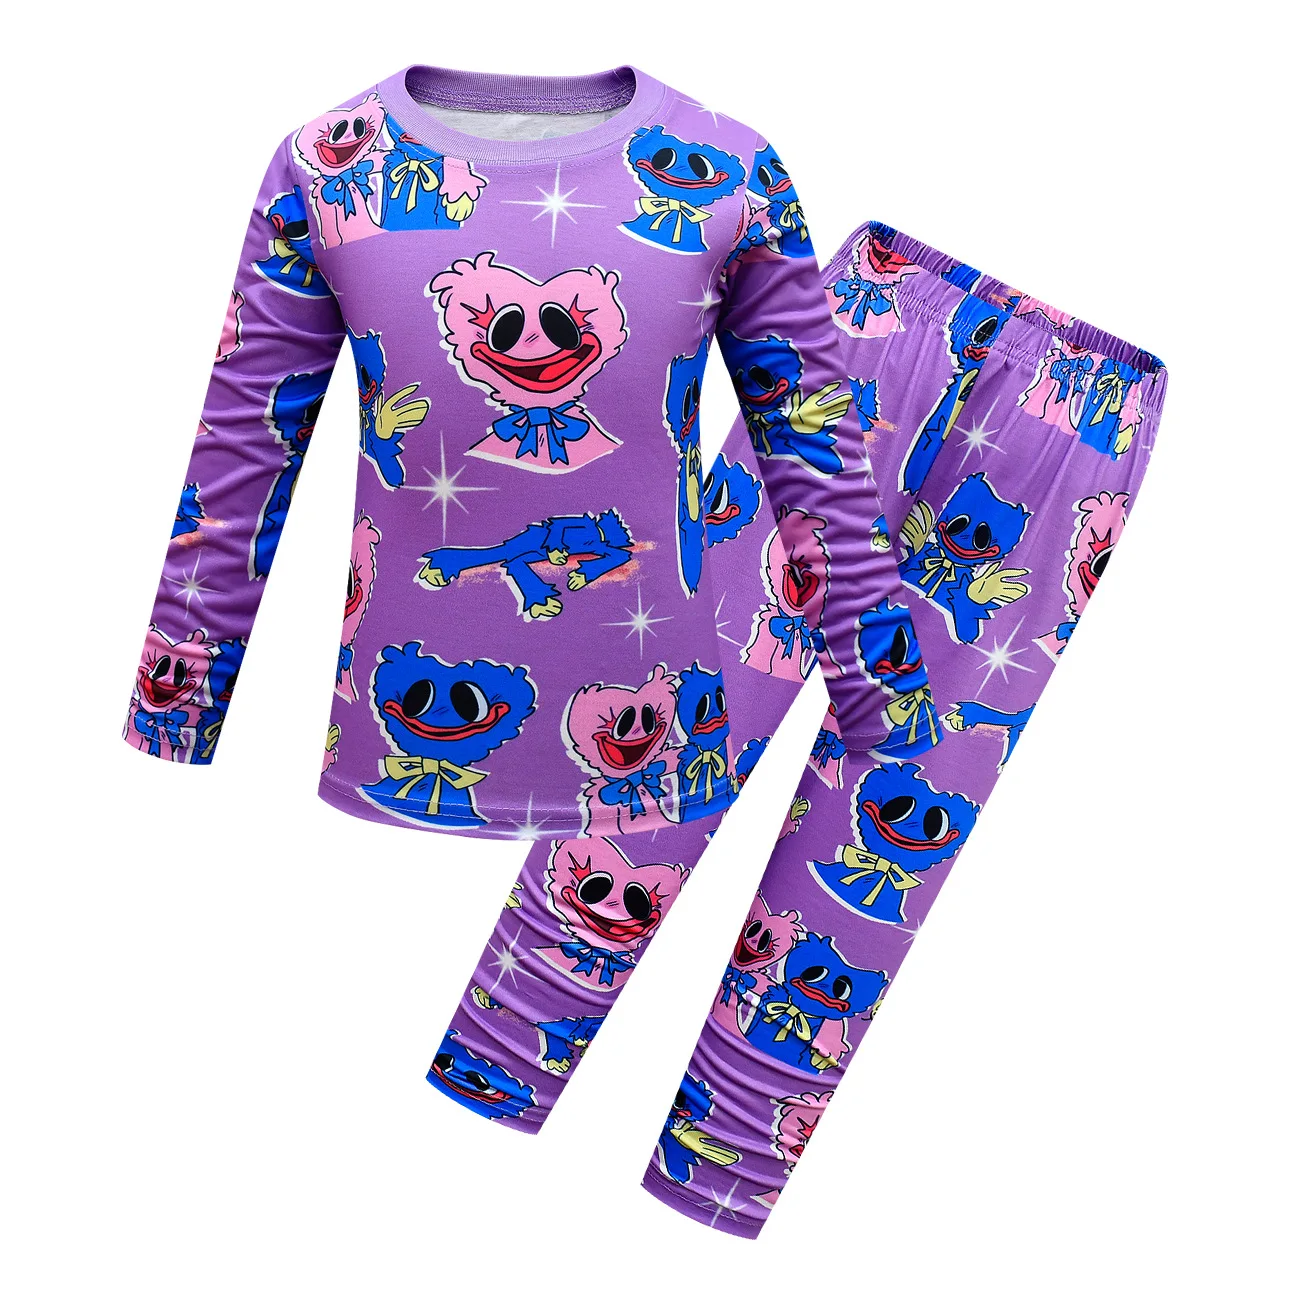 mens silk pajamas short set Huggy Wuggy Kids Clothes for Boys Girls Poppy Playtime Pajamas Long Sleeve Tops + Pants 2pcs Sets Baby Children casual Outfits mens designer pjs Men's Sleep & Lounge